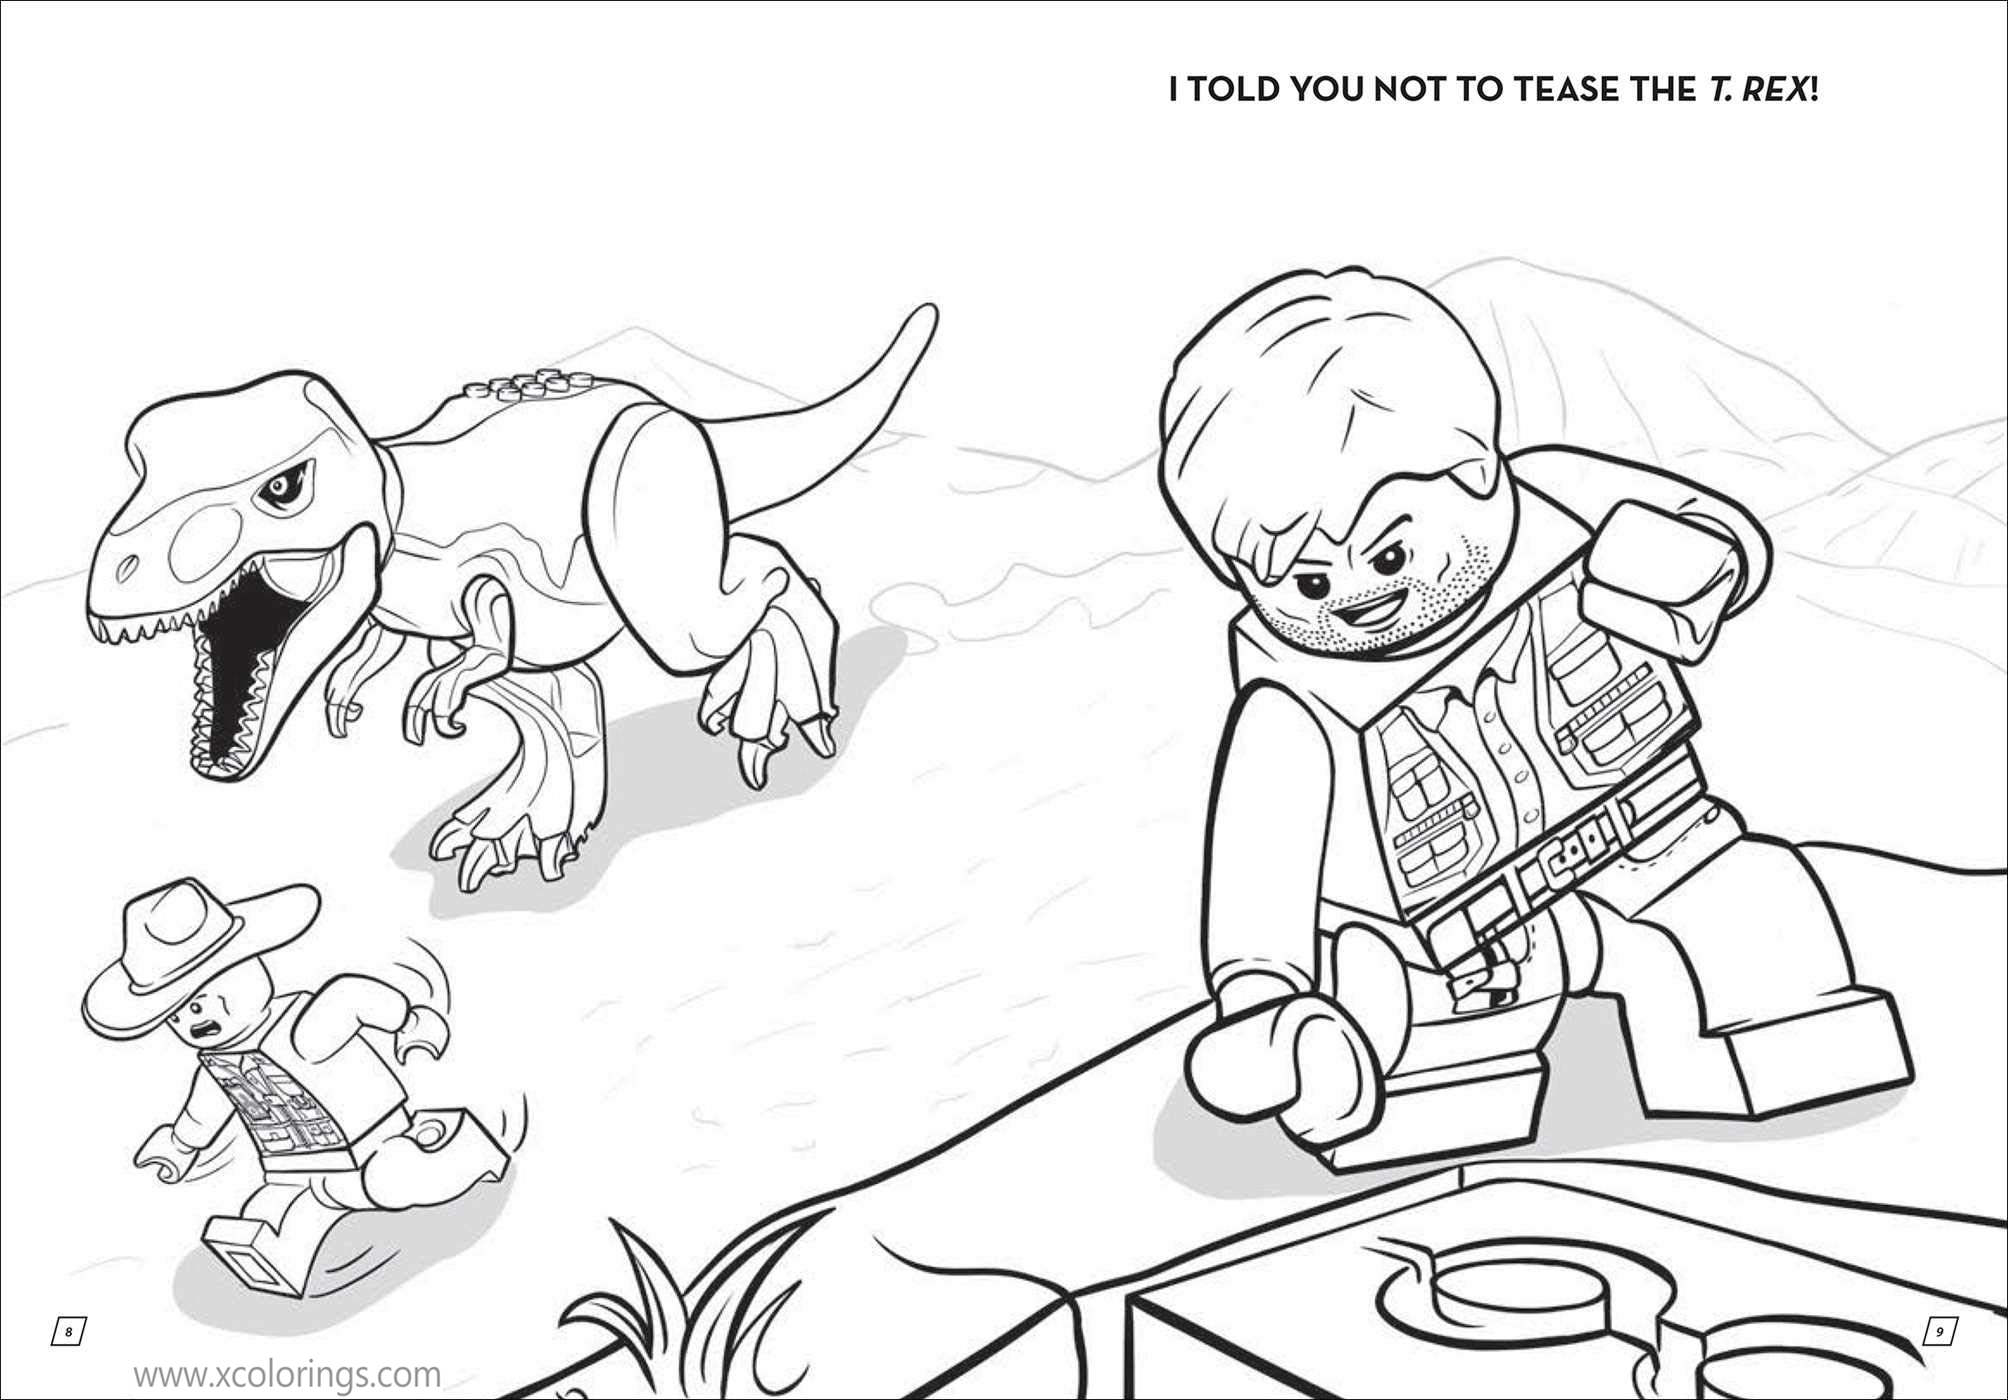 LEGO Jurassic World Coloring Pages Followed by T-Rex - XColorings.com